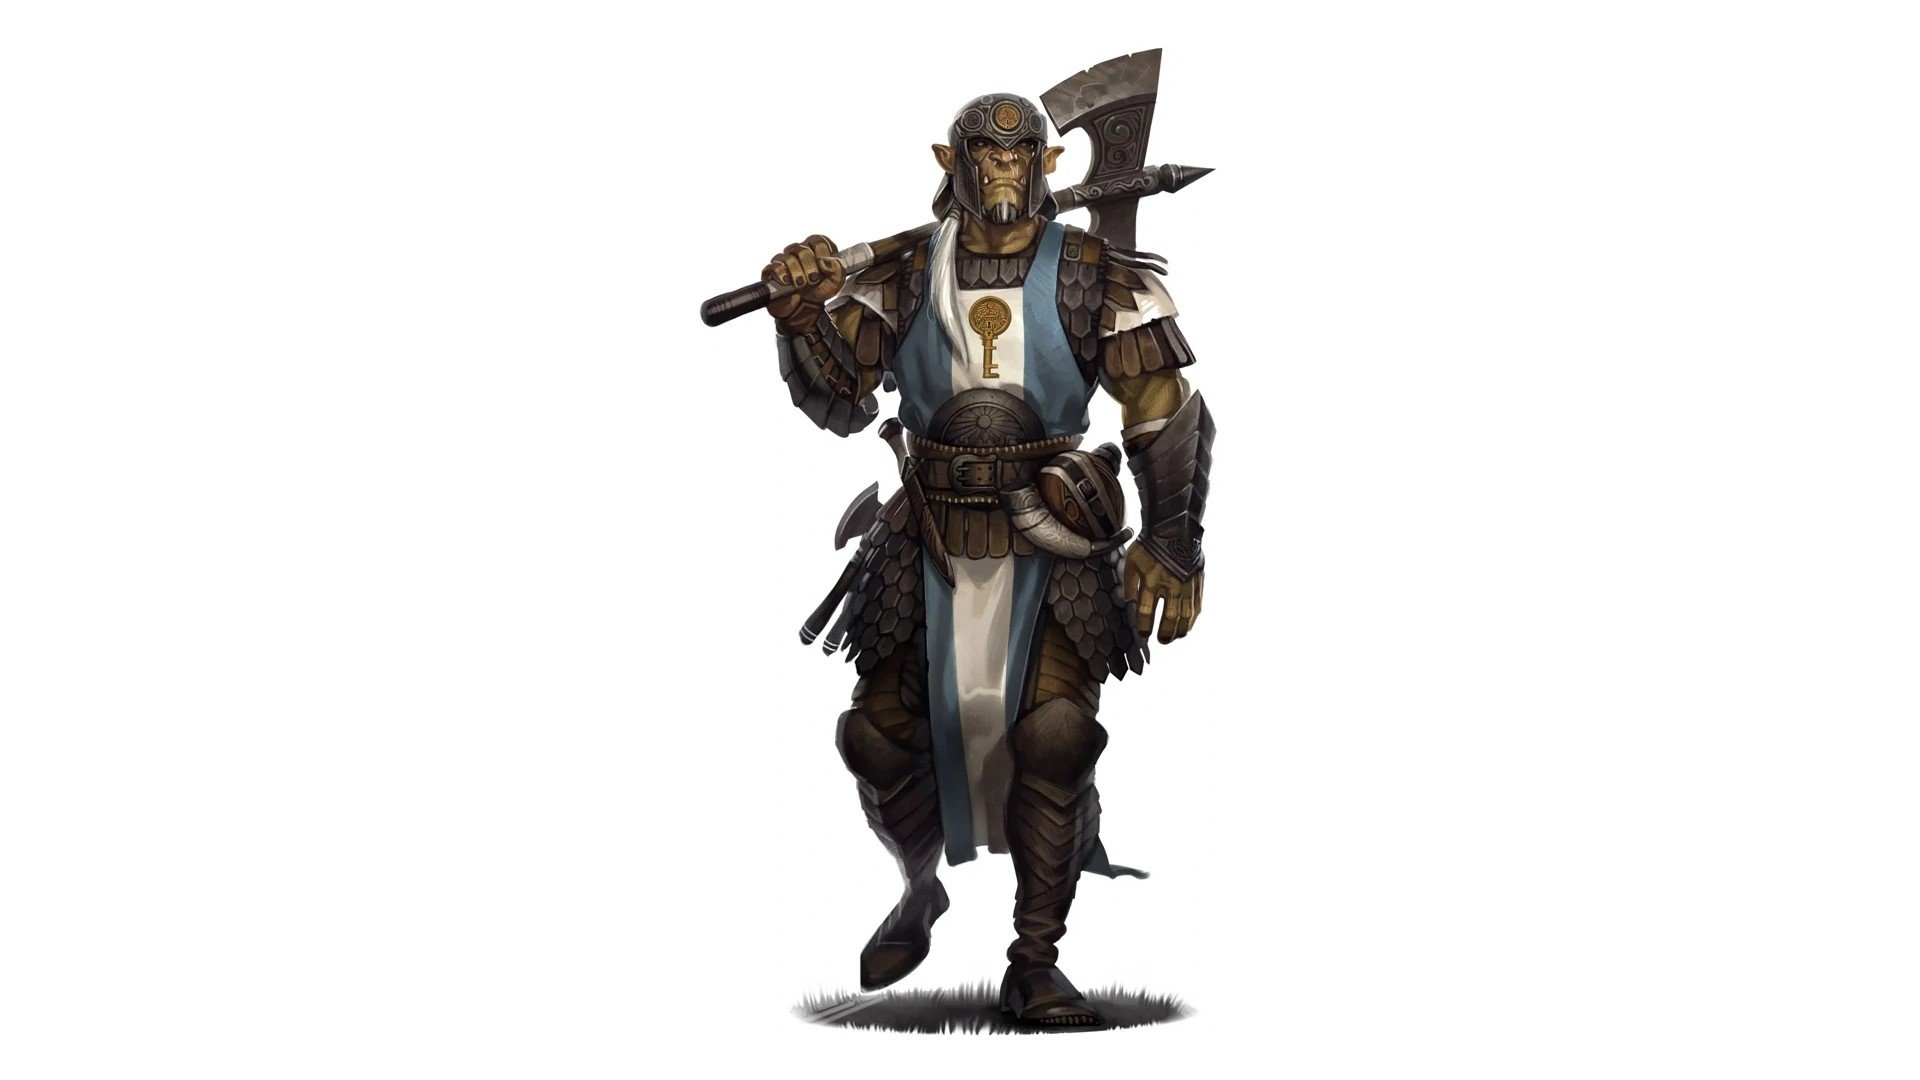 DnD Half-orc 5e Race Guide - Wizards of the Coast artwork showing a half-orc cleric with an ax